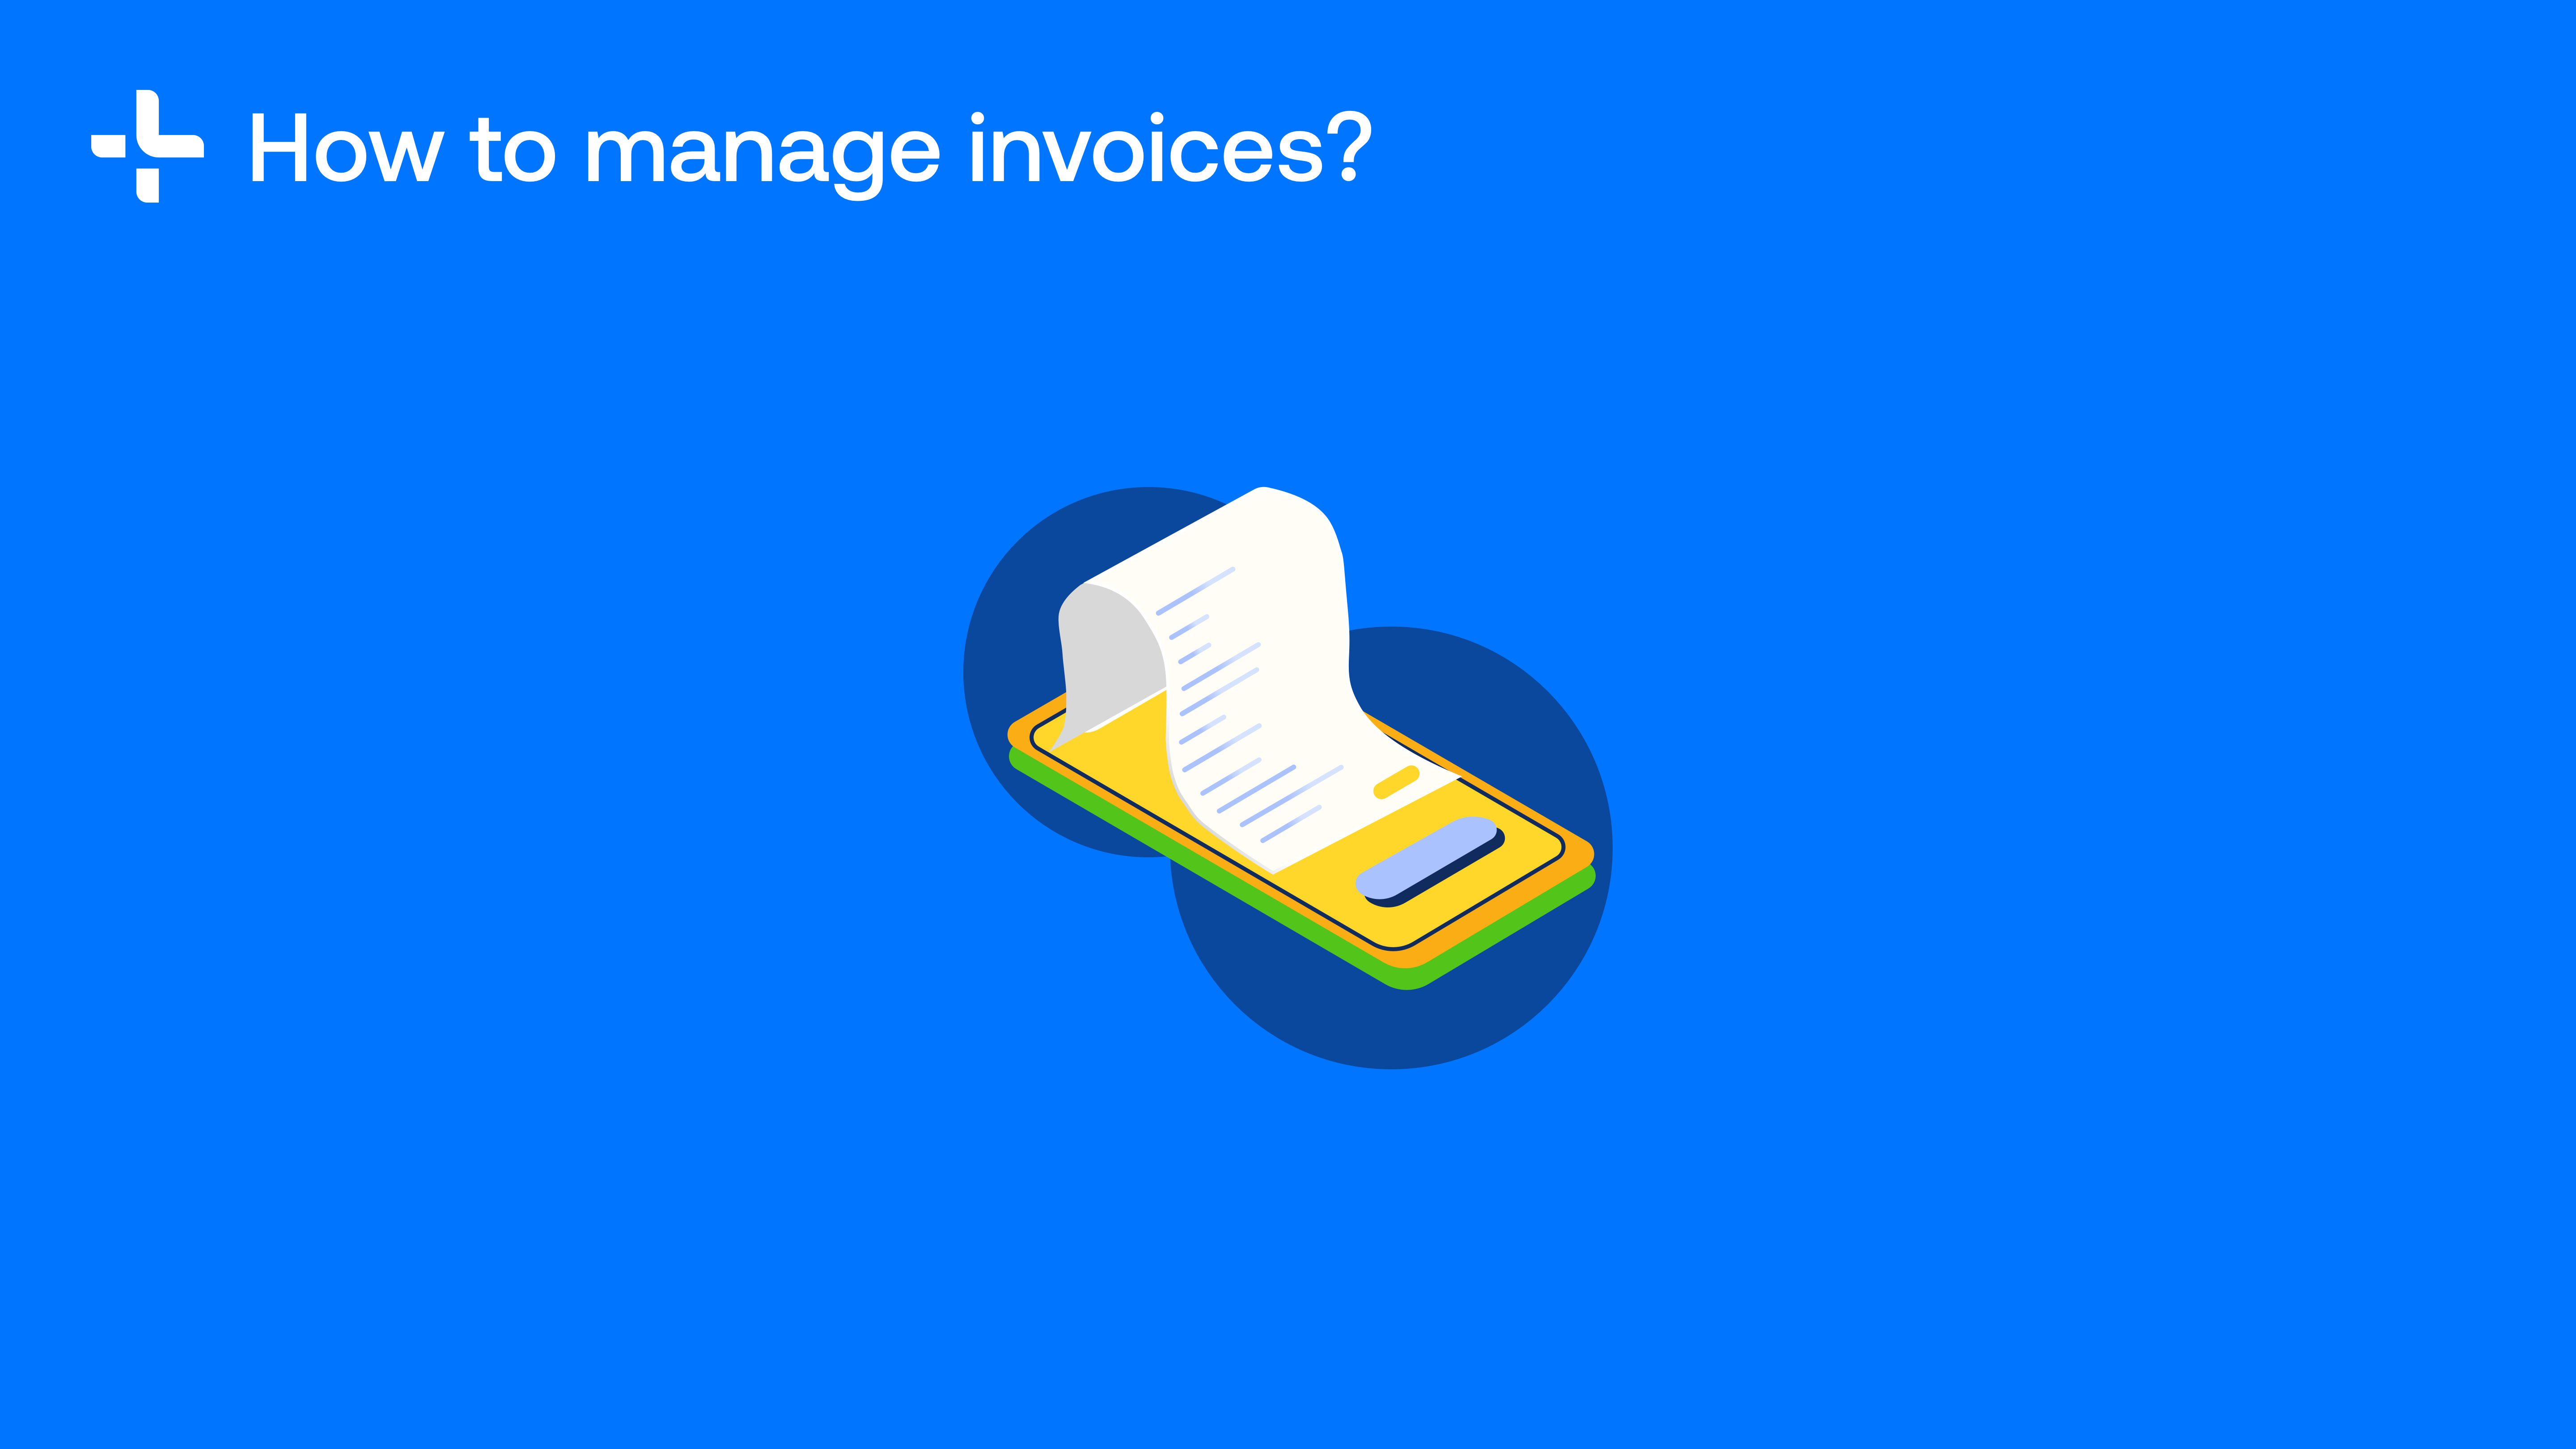 How to manage invoices